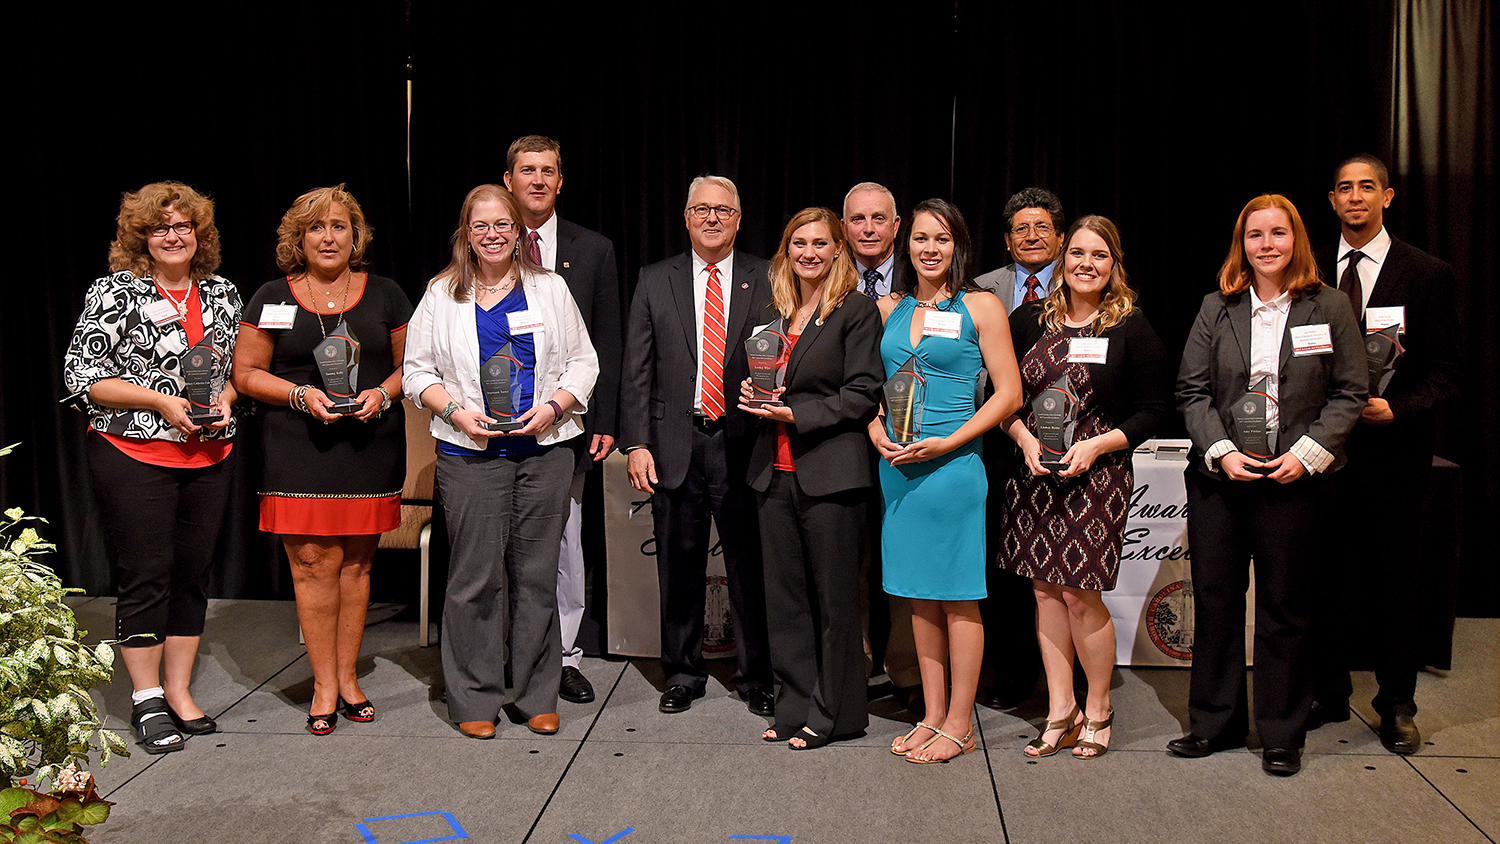 University Awards of Excellence winners